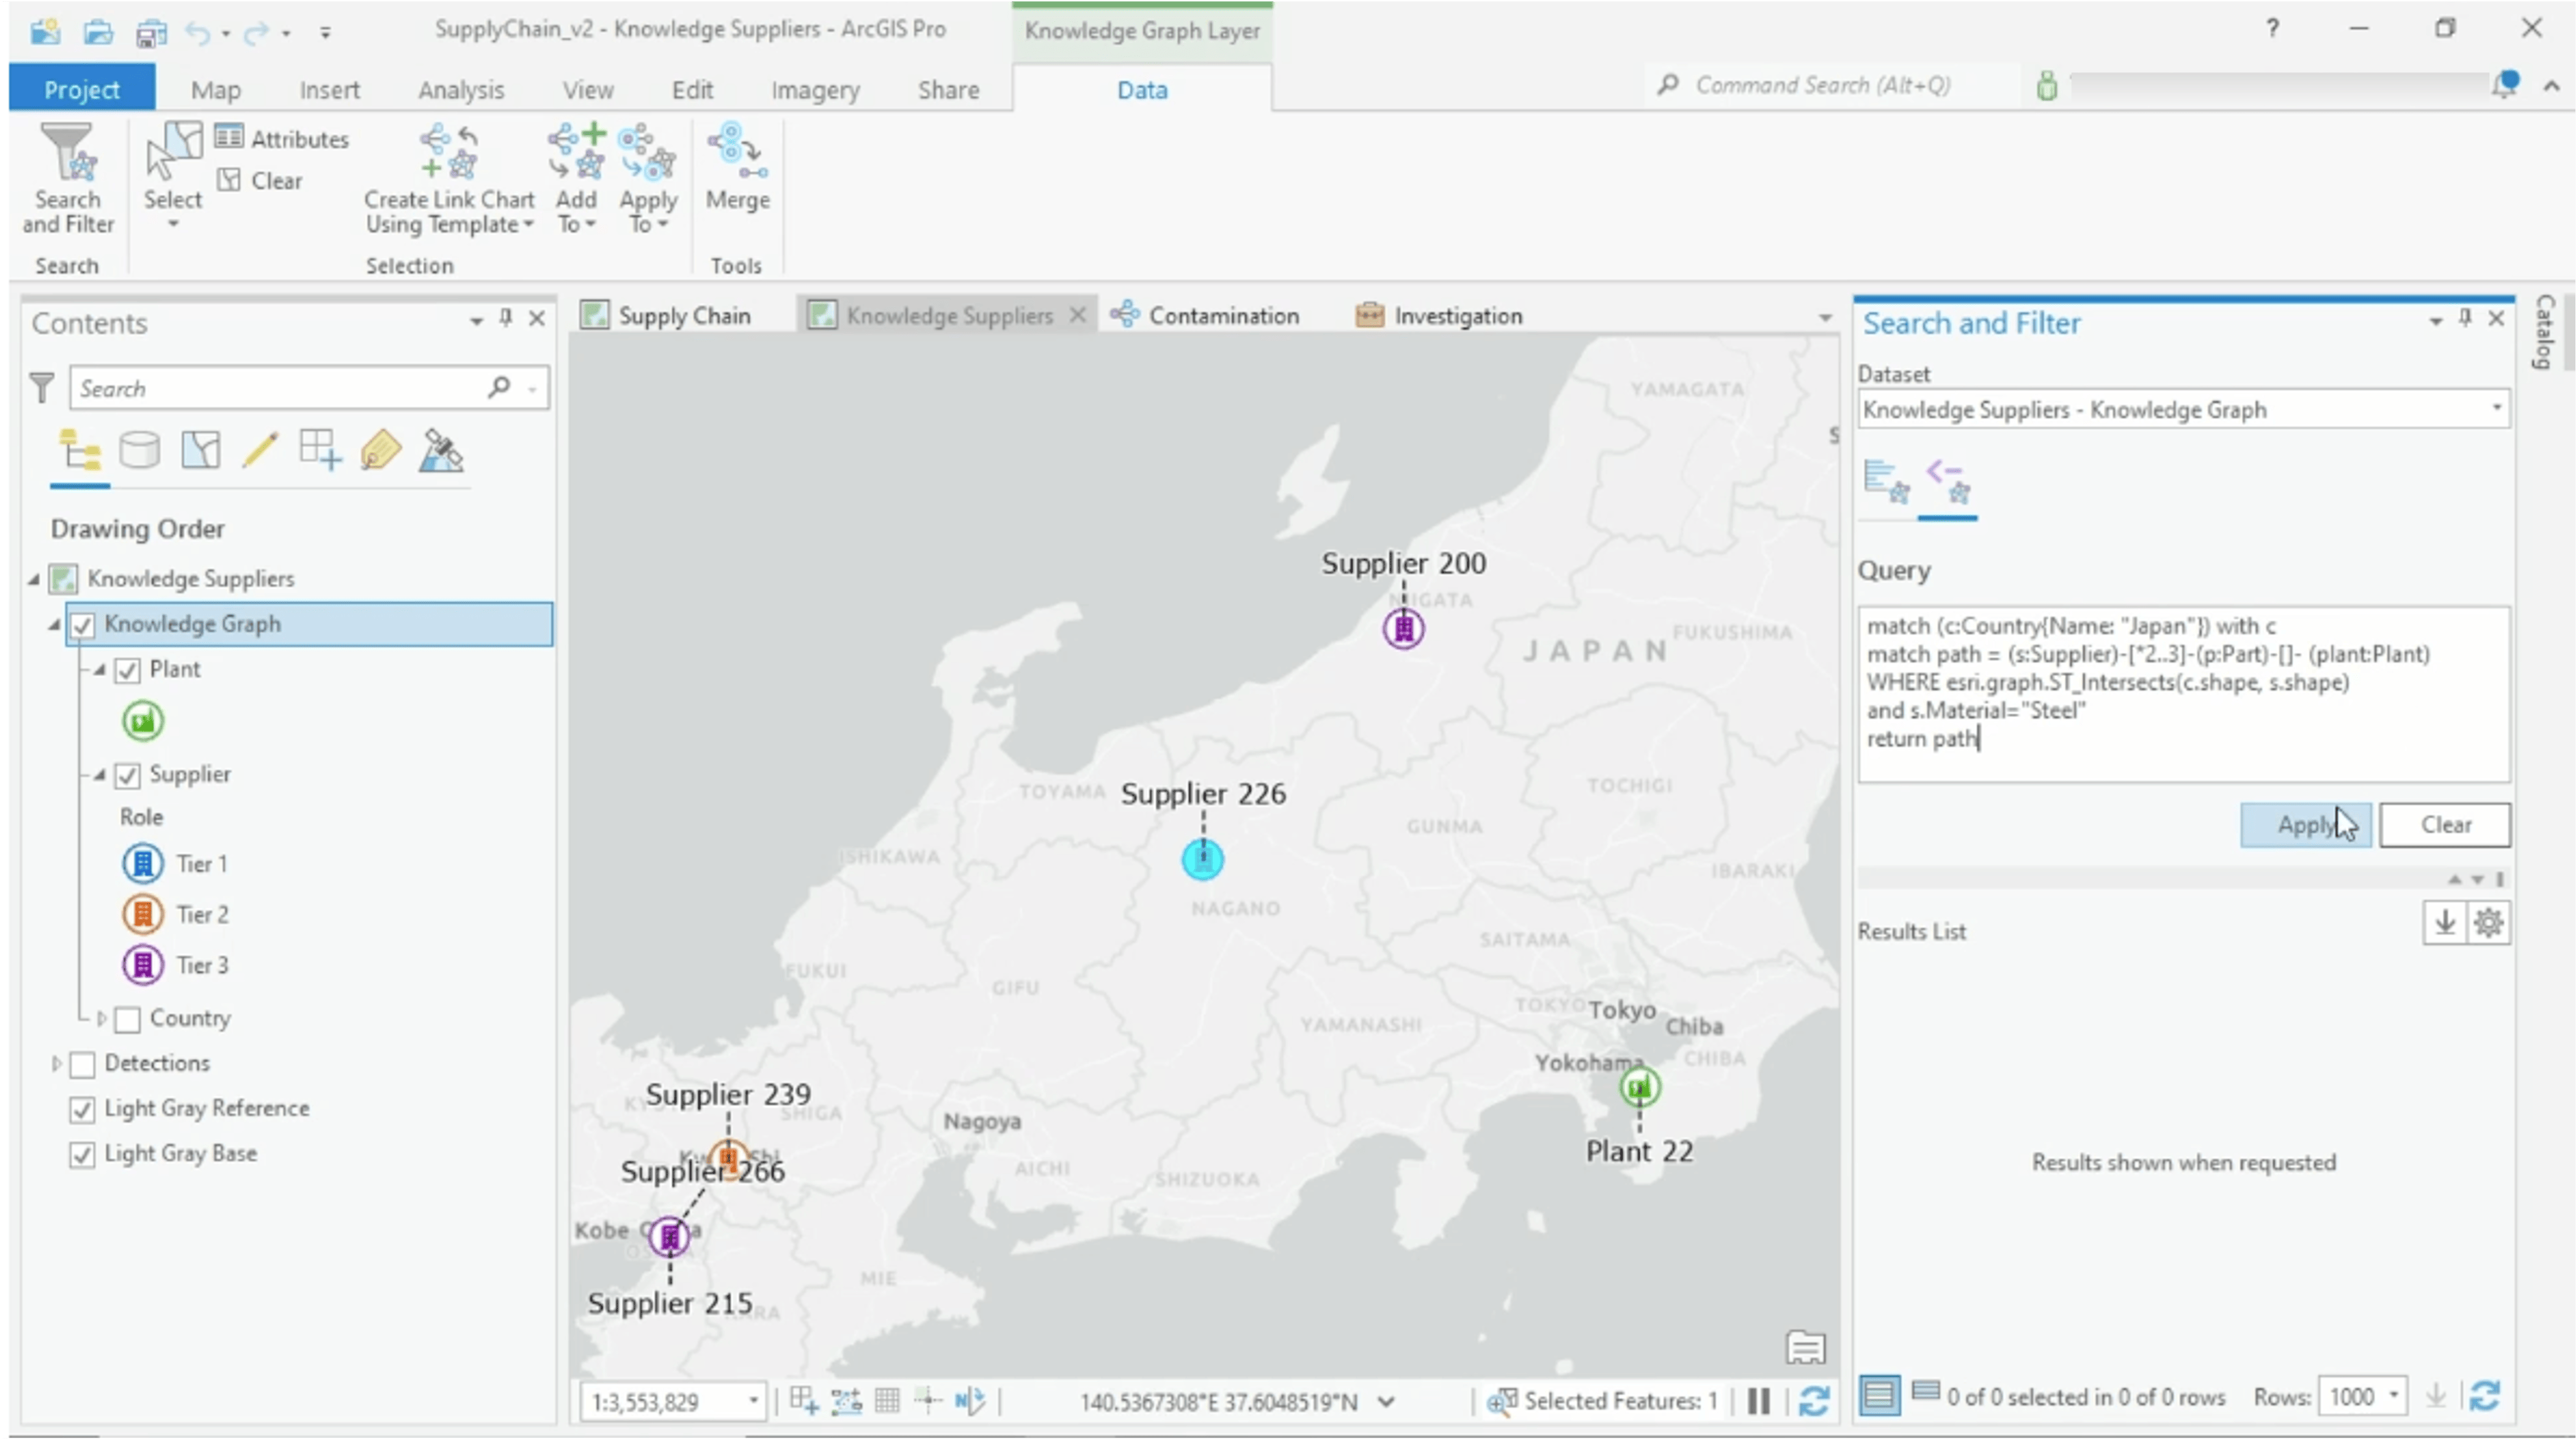 Image of environmental contamination location for Supplier 226 and graph query.